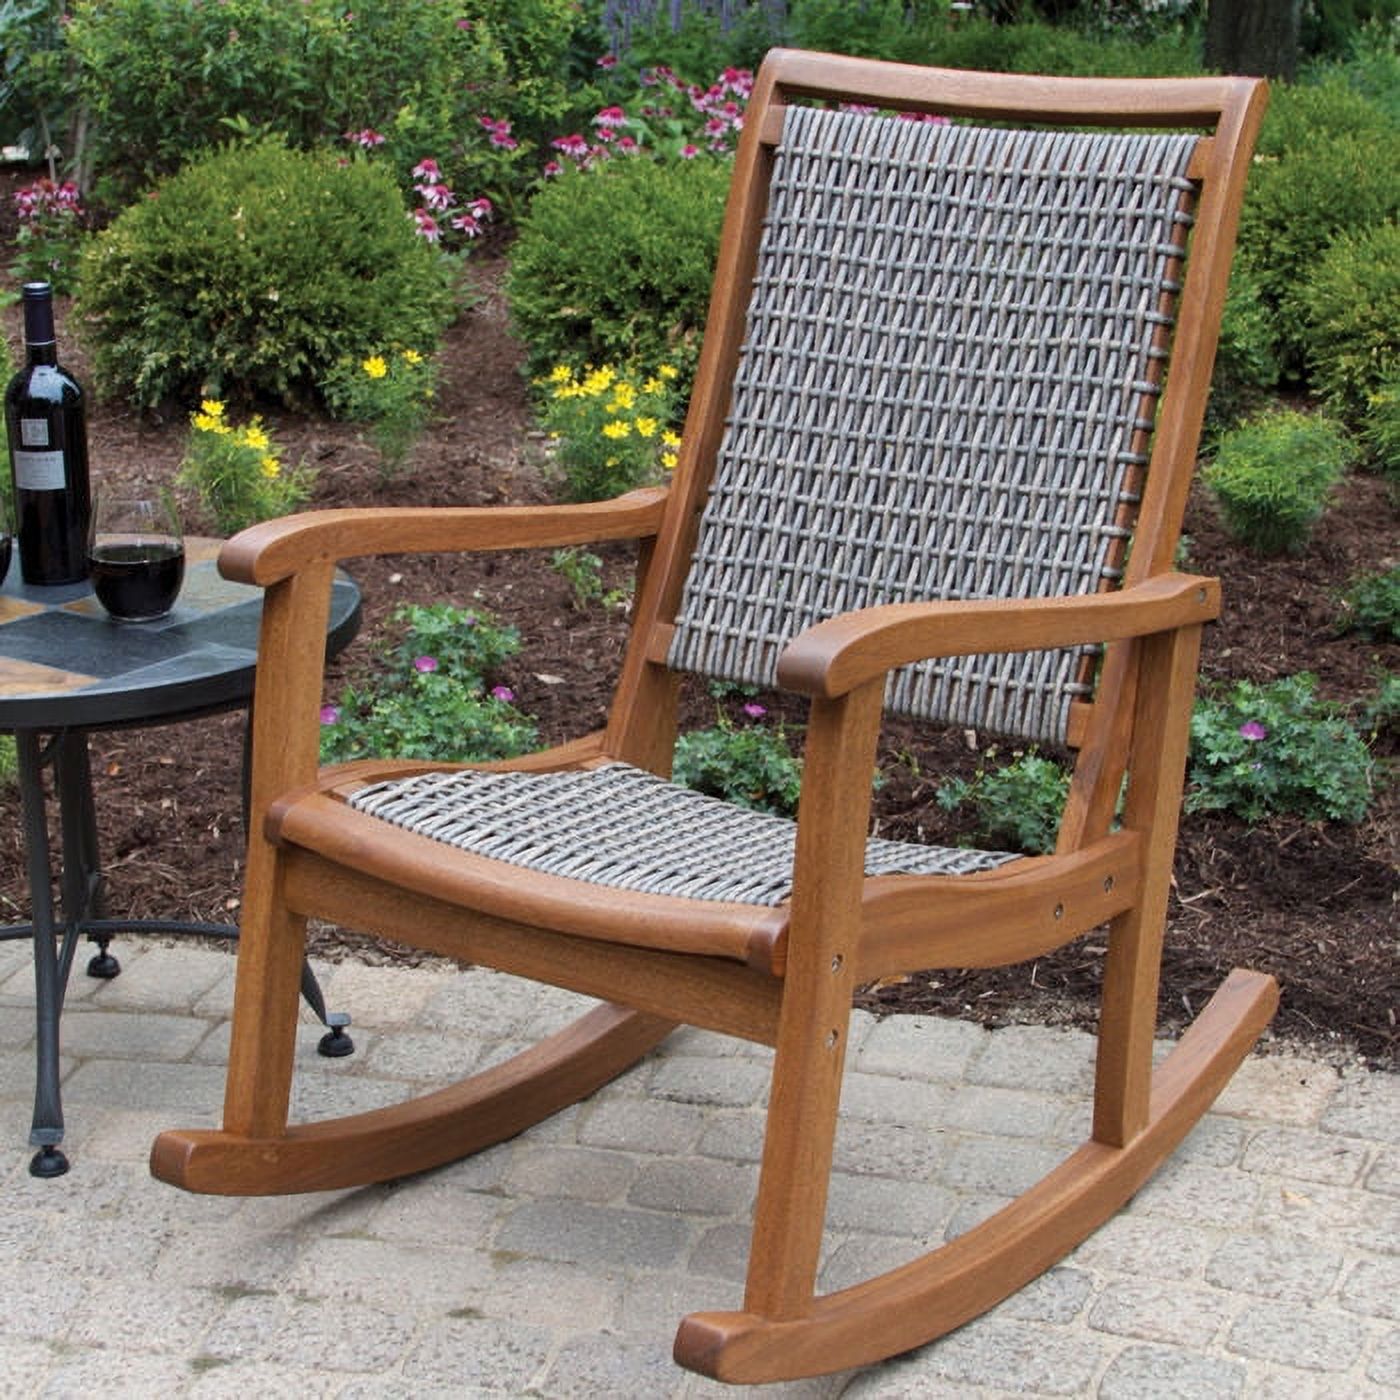 Outdoor Interiors Resin Wicker and Eucalyptus Rocking Chair, Brown and Grey - image 2 of 4